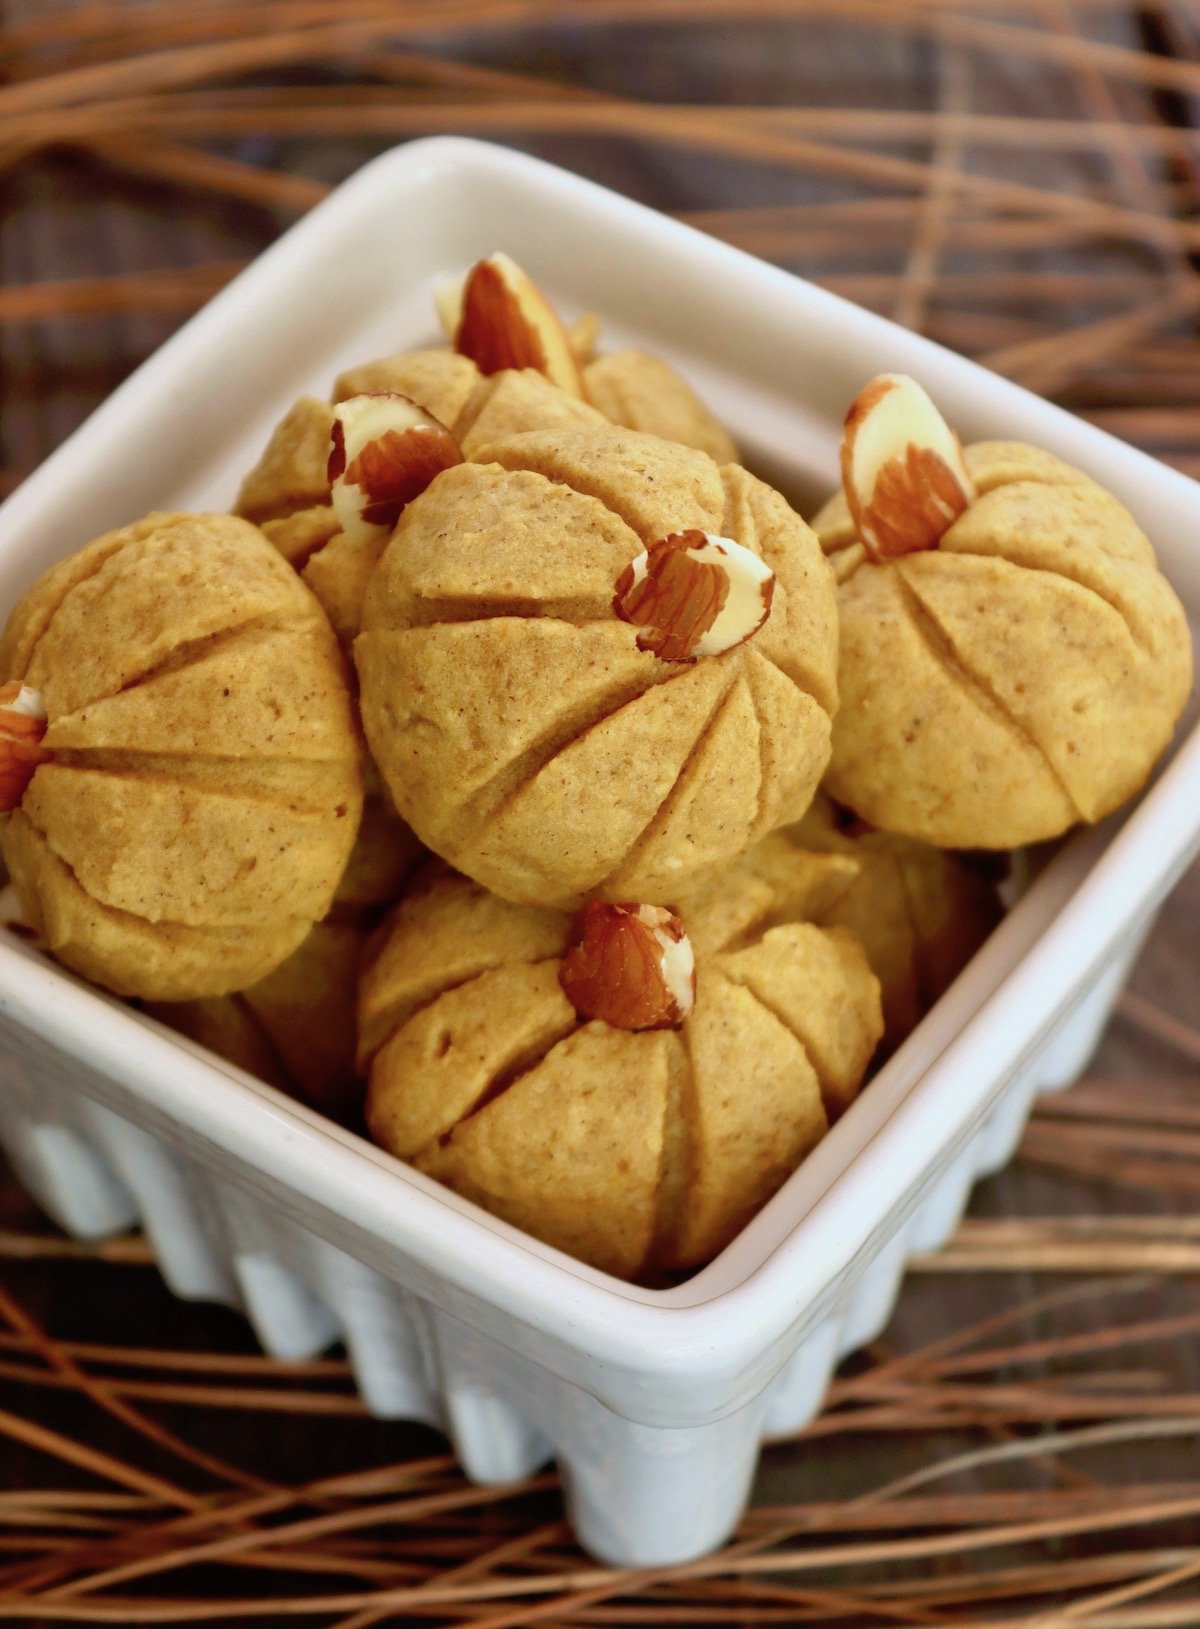 Several Pumpkin Almond Flour cookies in a white ceramic box on wood surface.